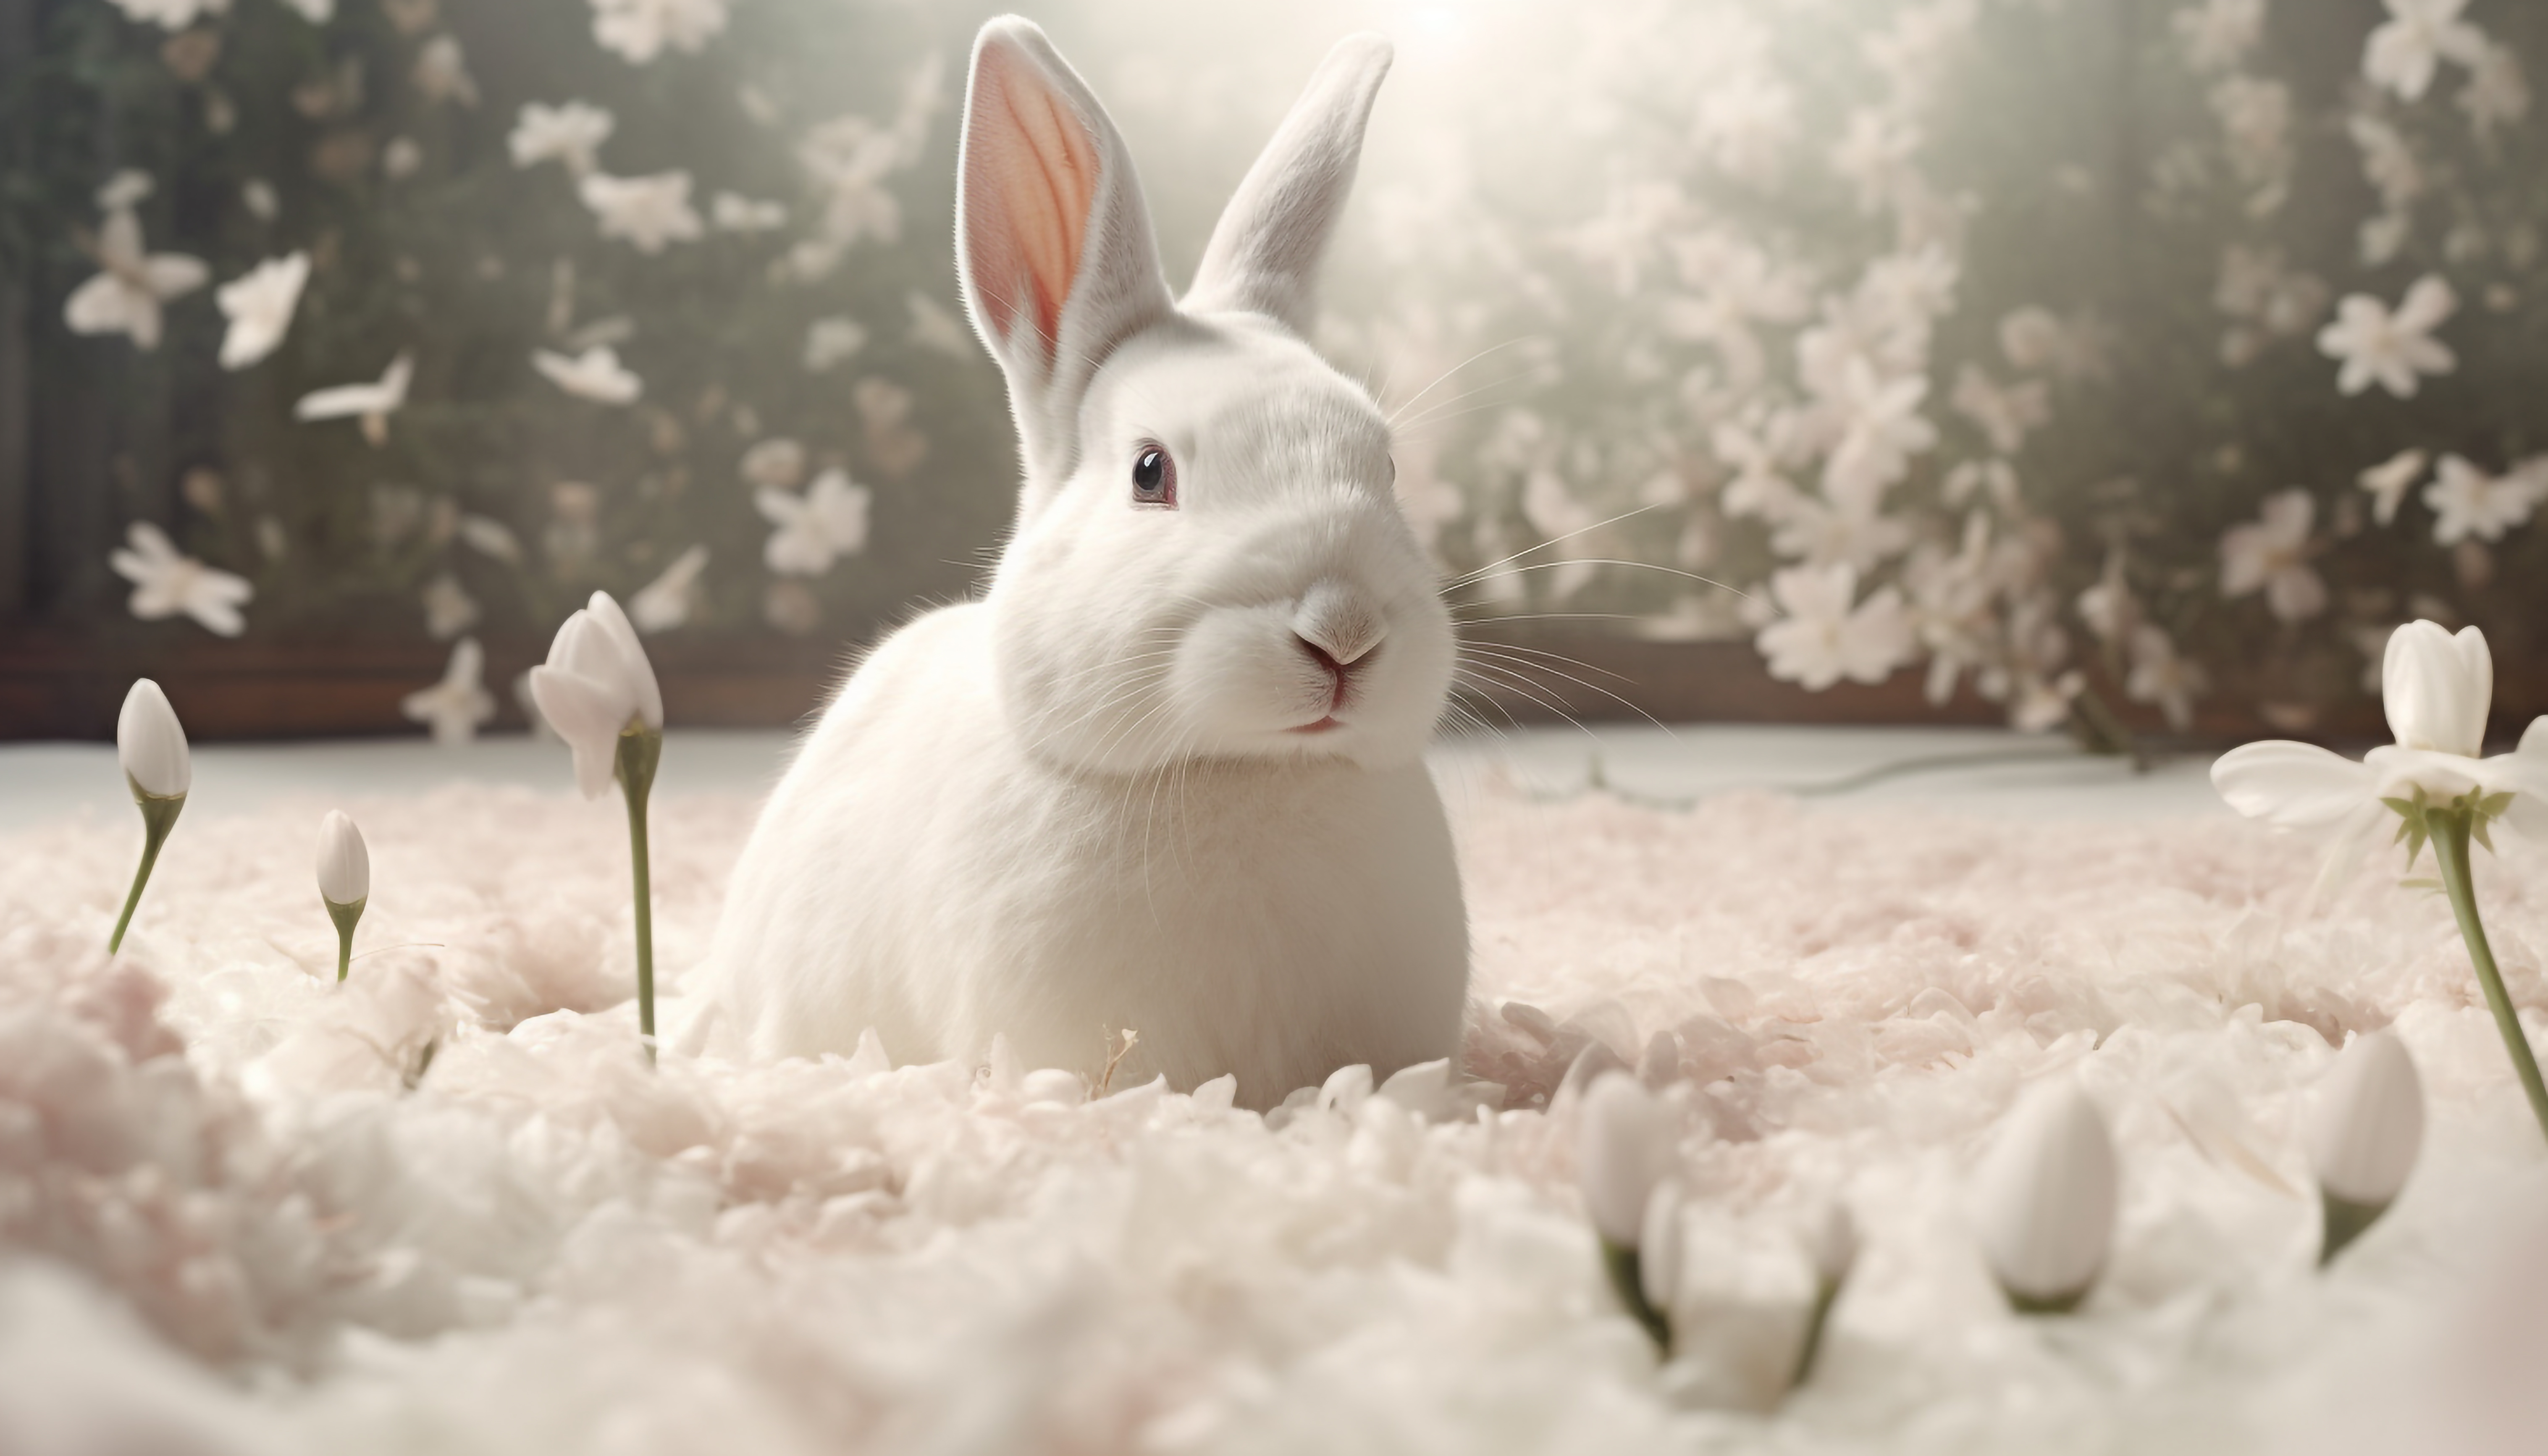 Bear And Rabbit Purple Lovely Wallpaper Background Wallpaper Image For Free  Download  Pngtree